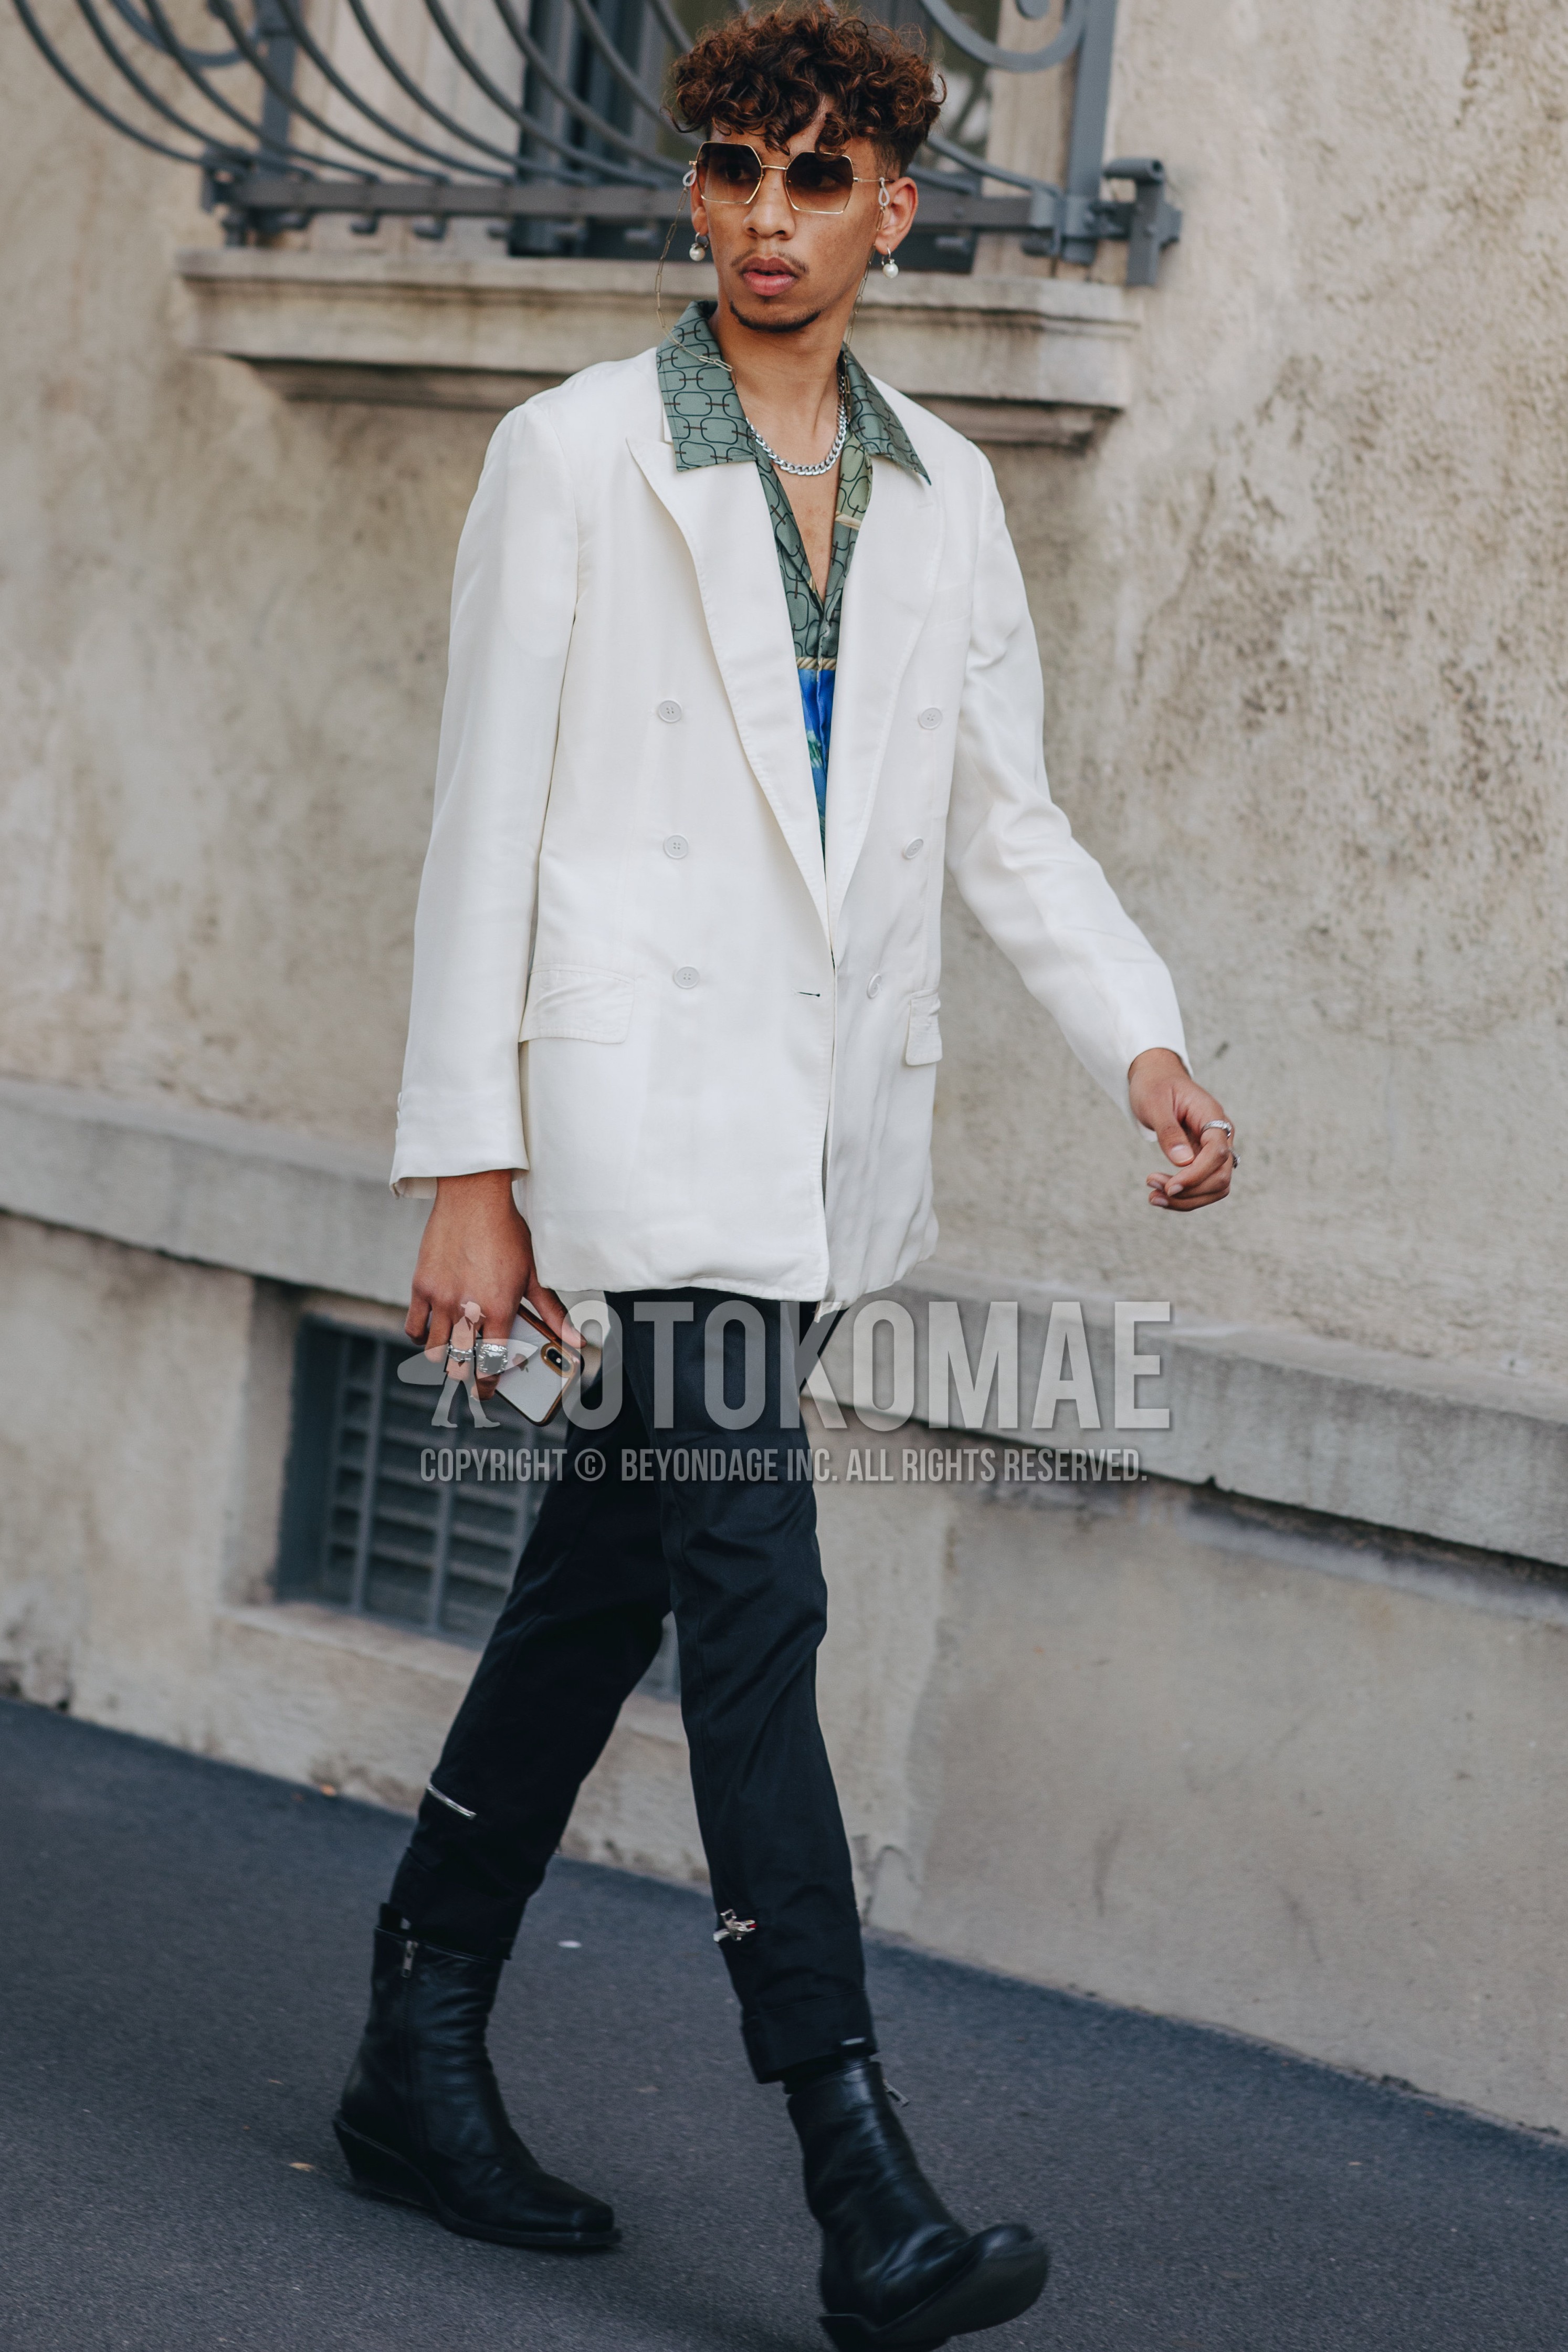 Men's spring summer outfit with gold plain sunglasses, white plain tailored jacket, green tops/innerwear shirt, black plain bottoms, black  boots.